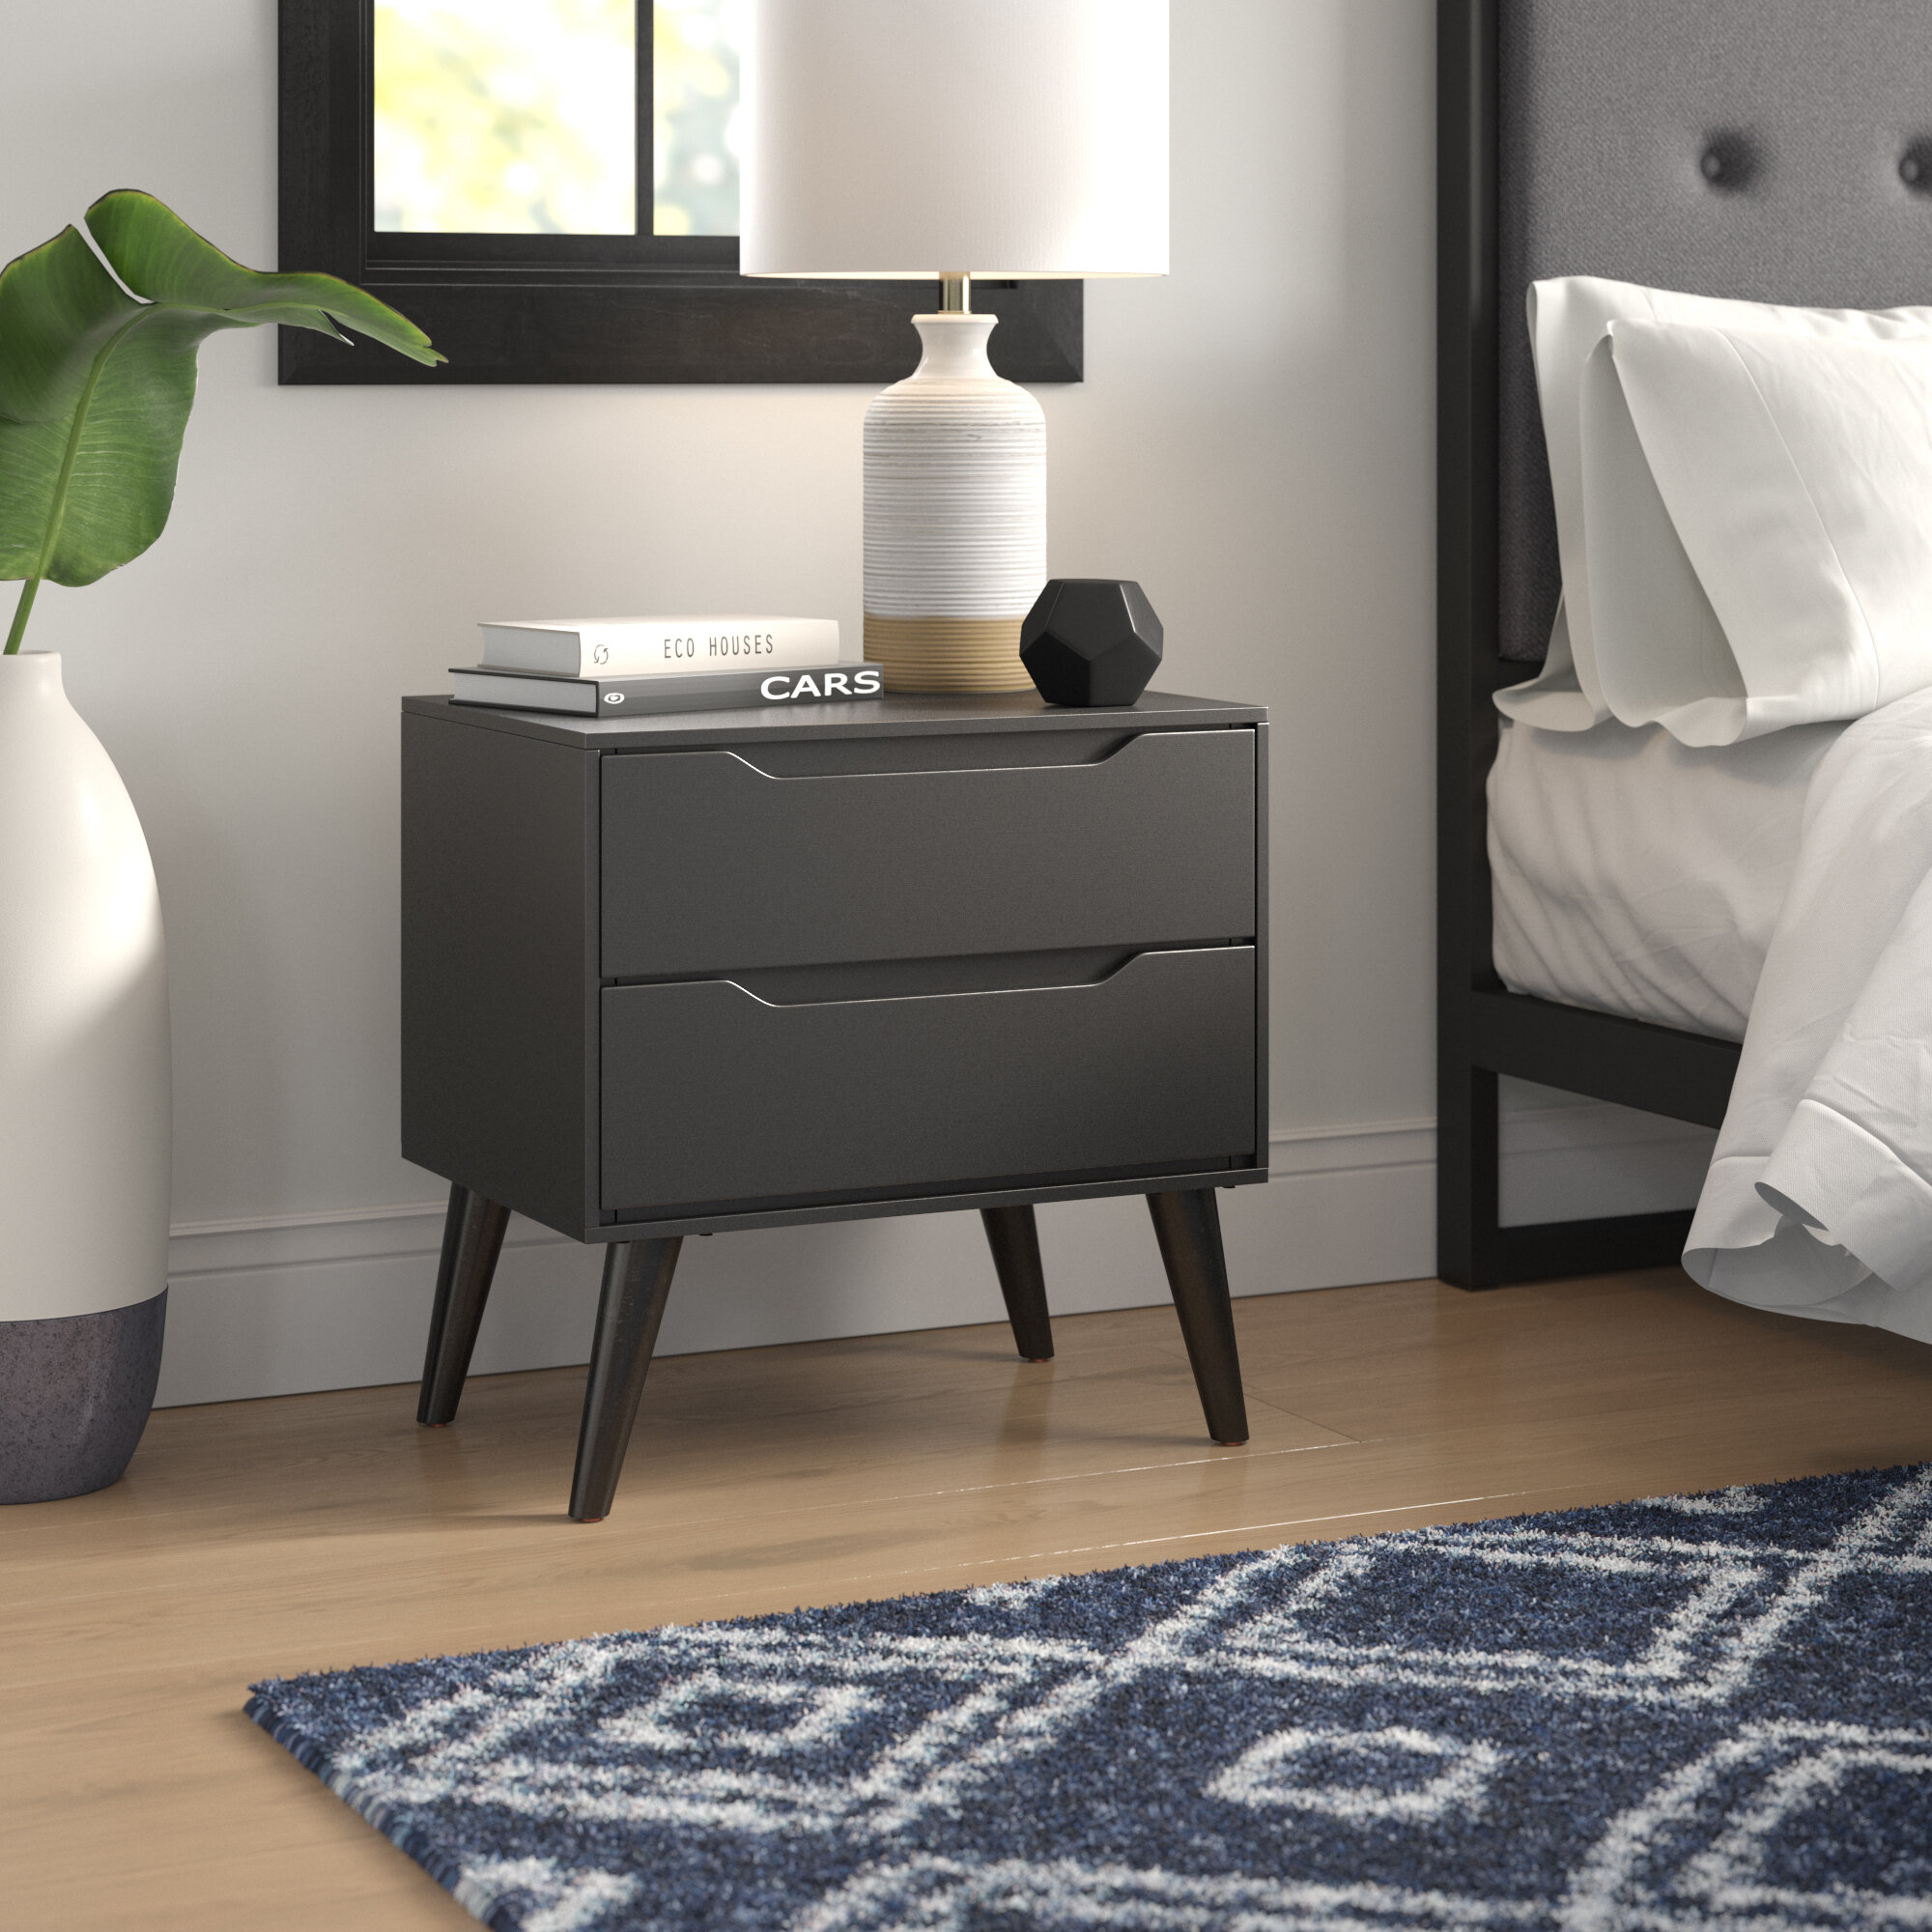 16 Nightstands & Side Tables Perfect For Small Bedrooms - Chloe Dominik